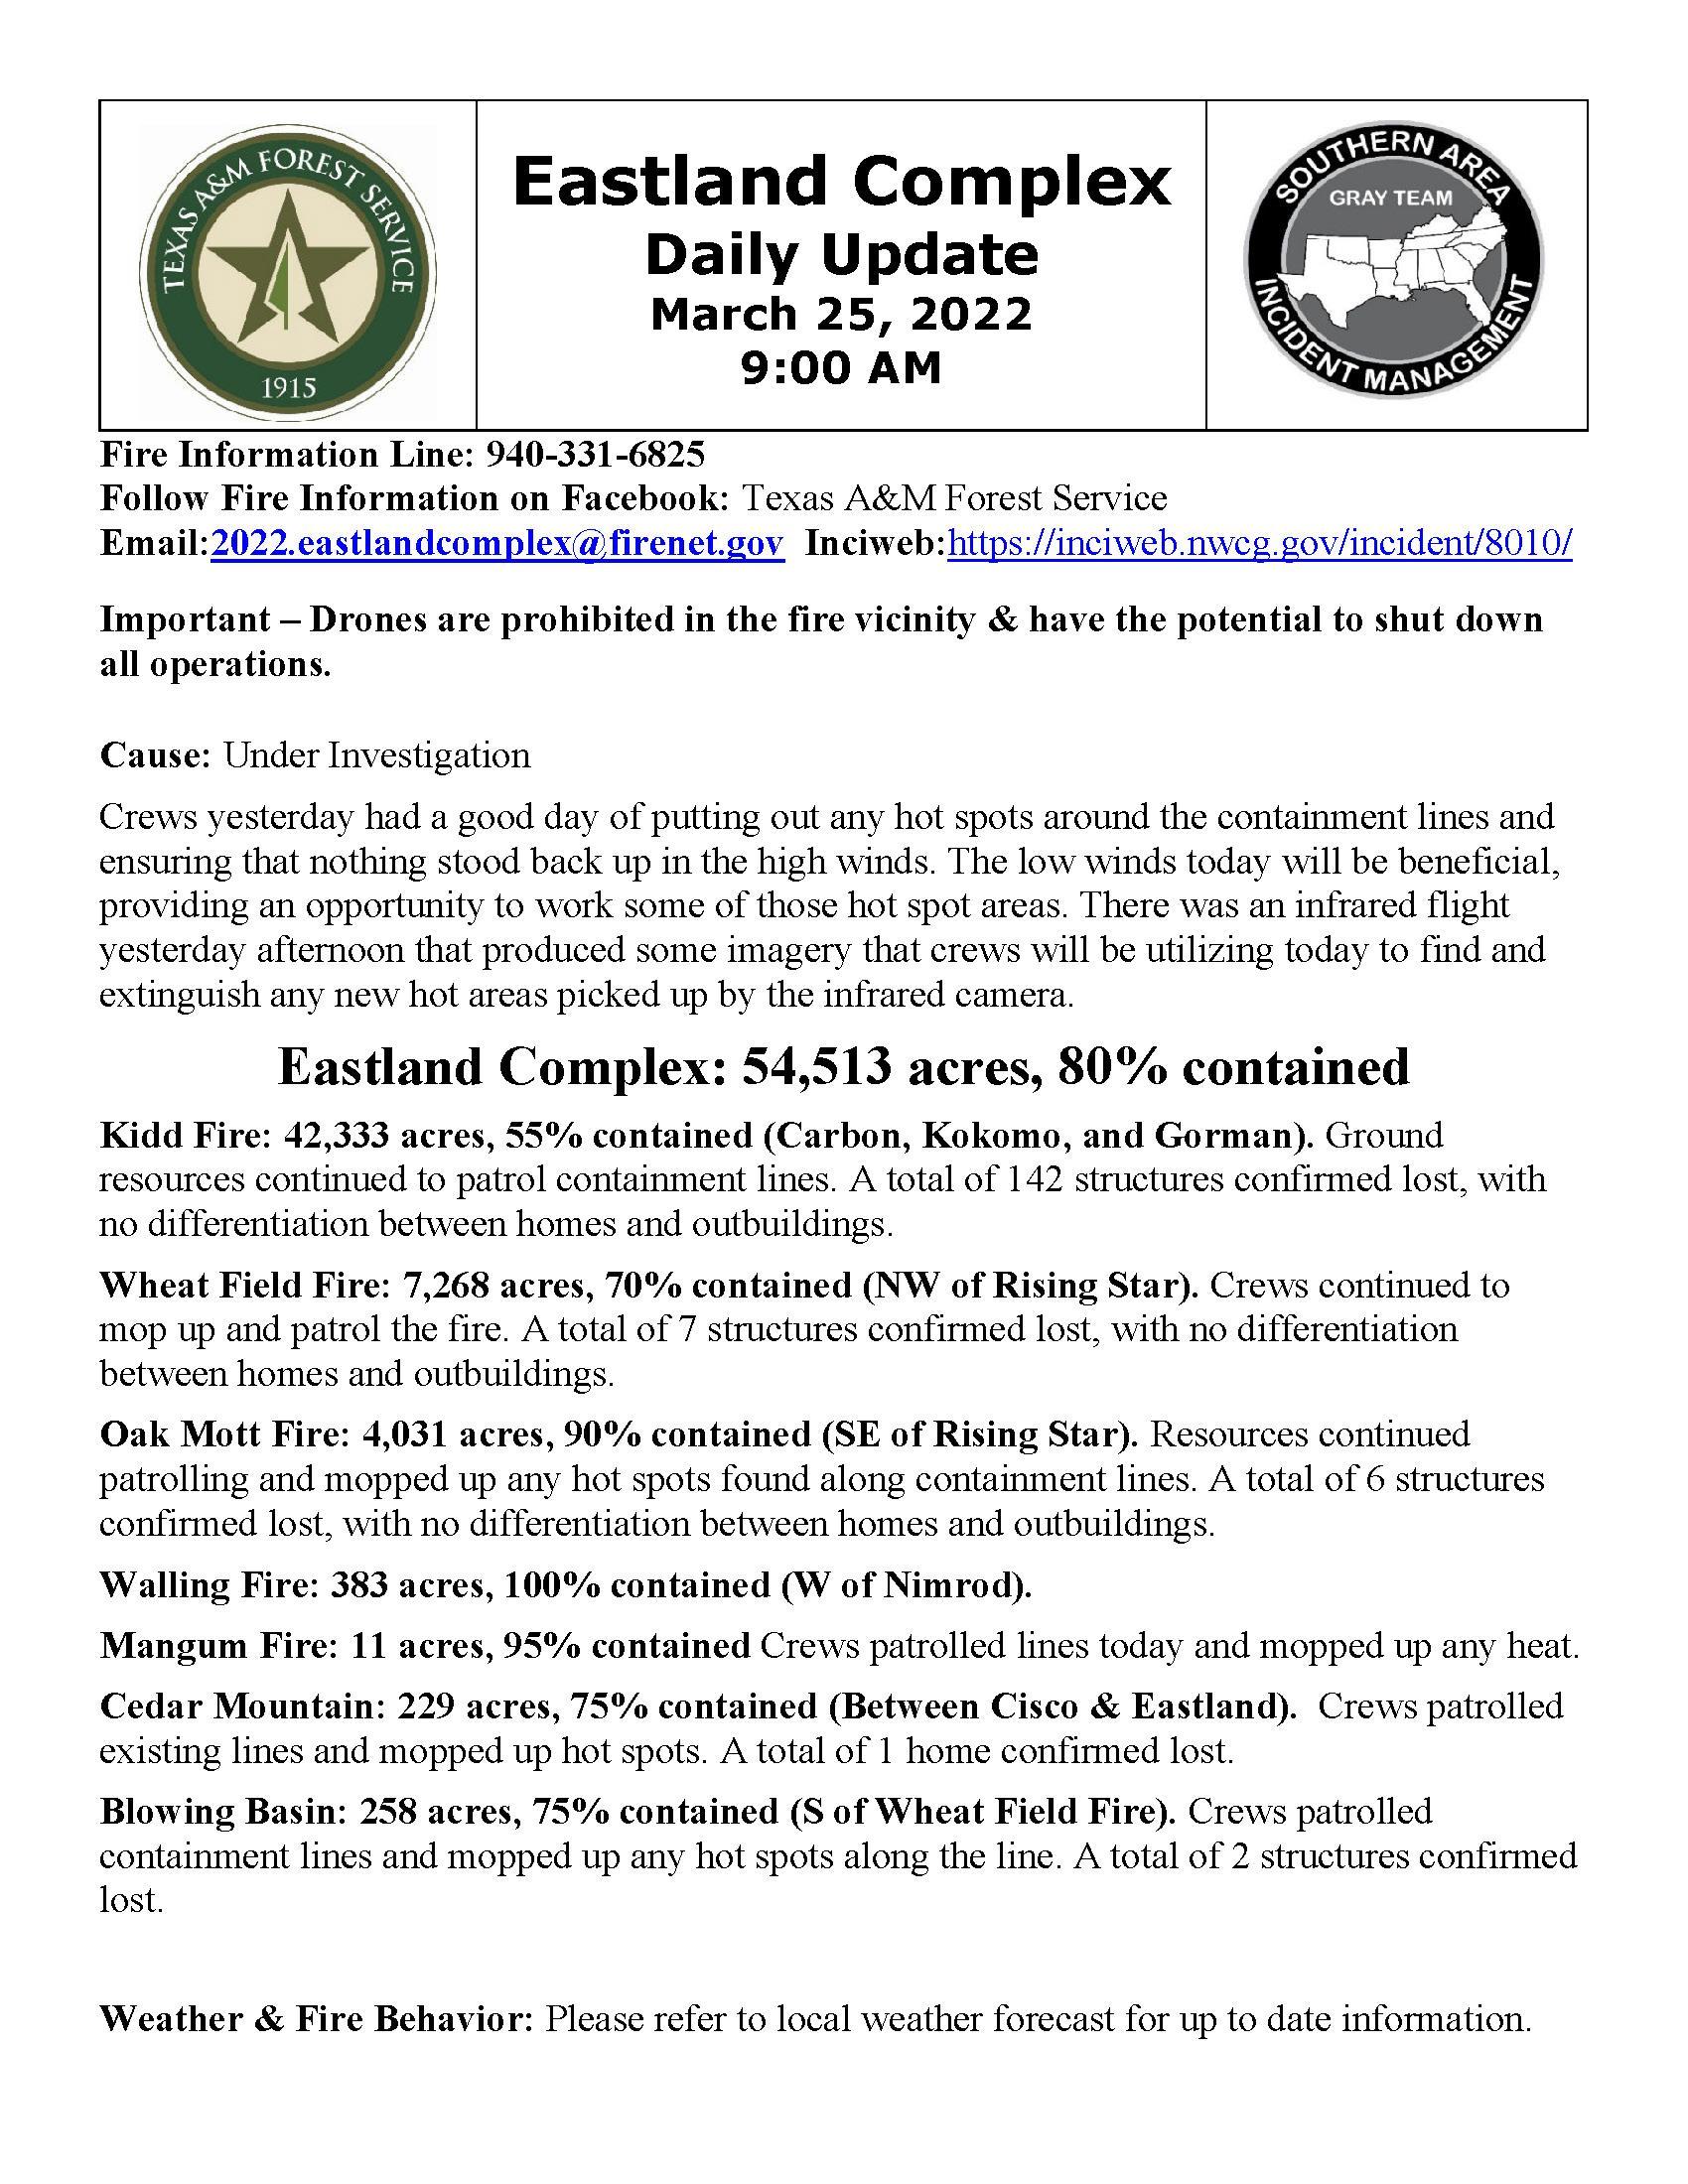 The document containing the update for Eastland Complex fire